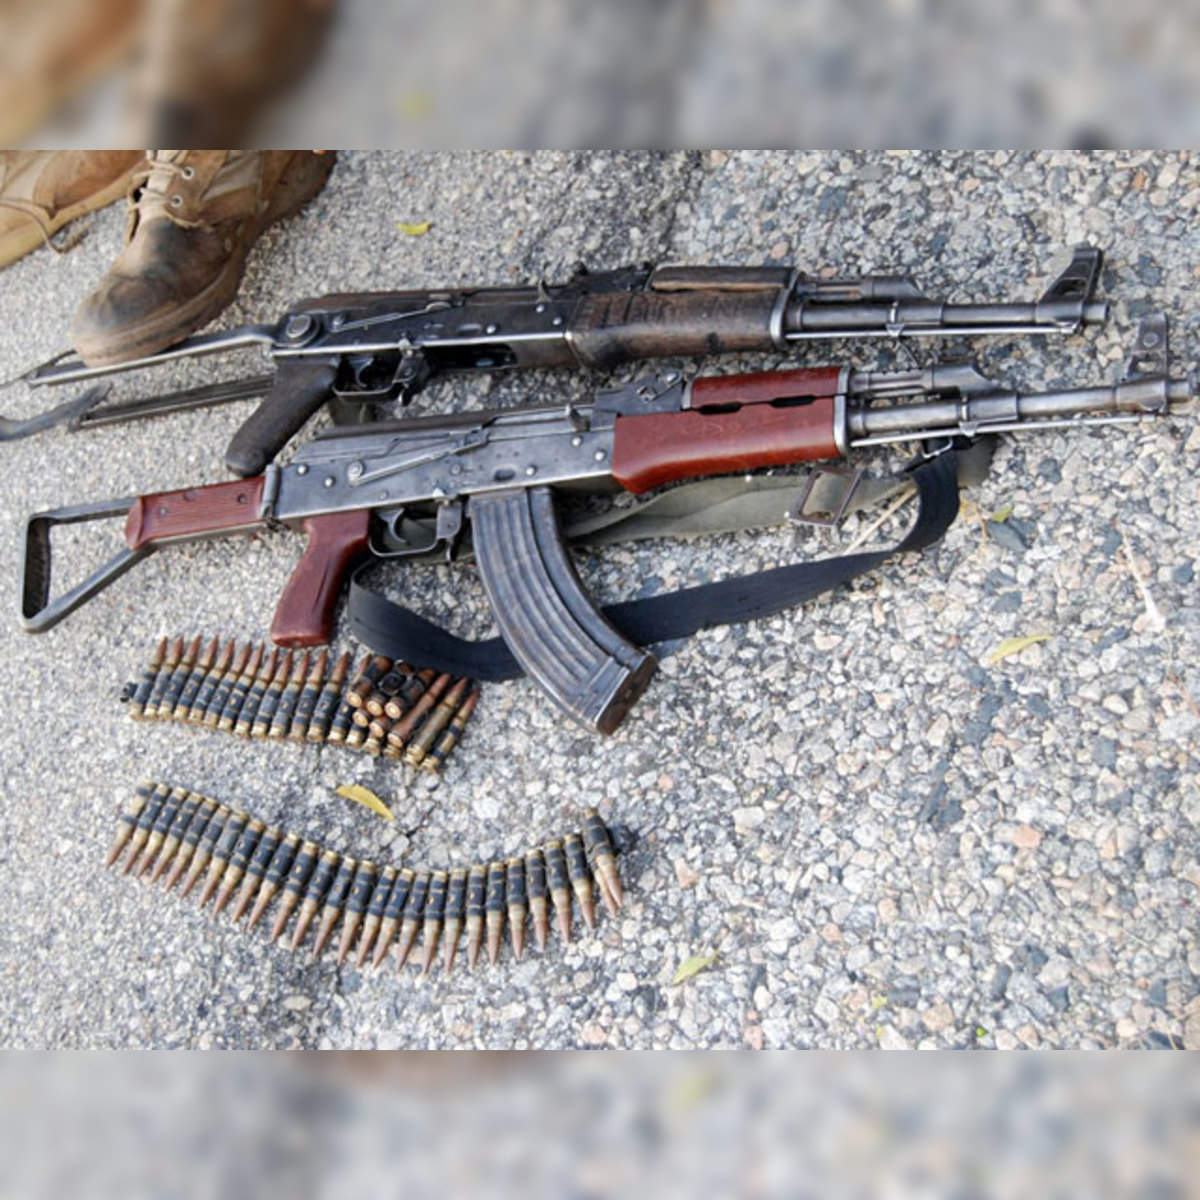 AK-47 maker in talks for joint venture in India to manufacture